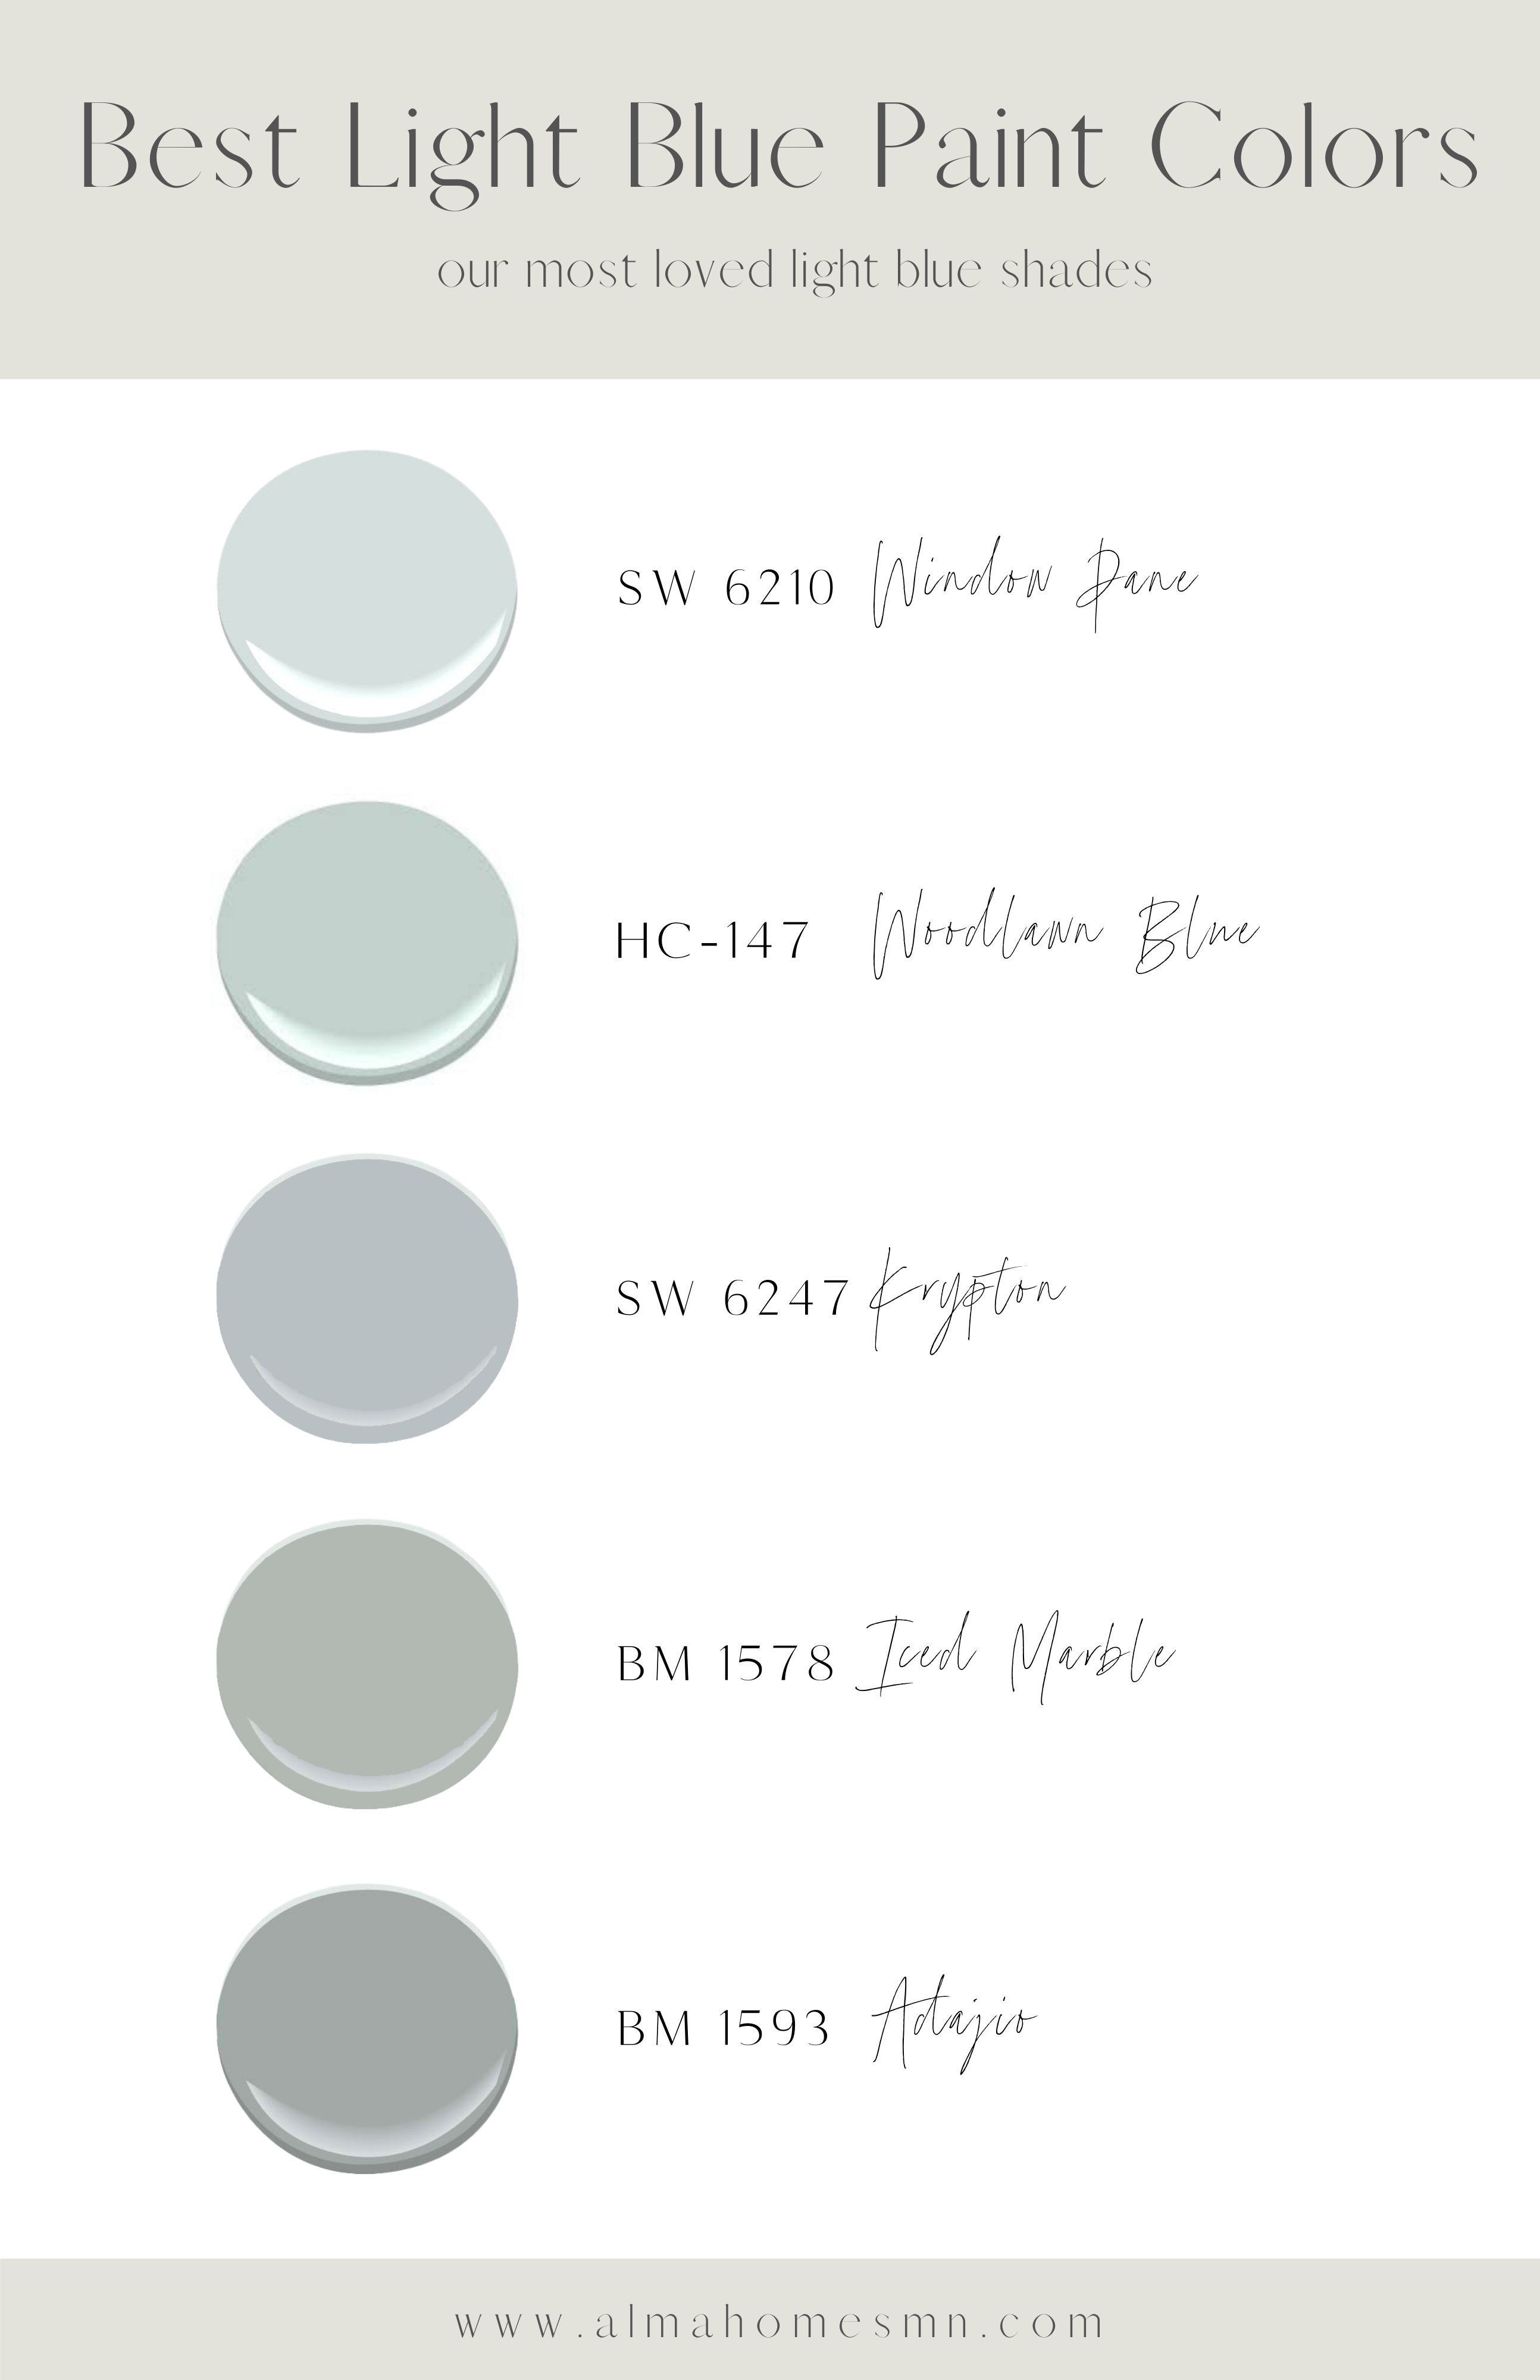 The Best Light Blue Paint Your Home | Alma